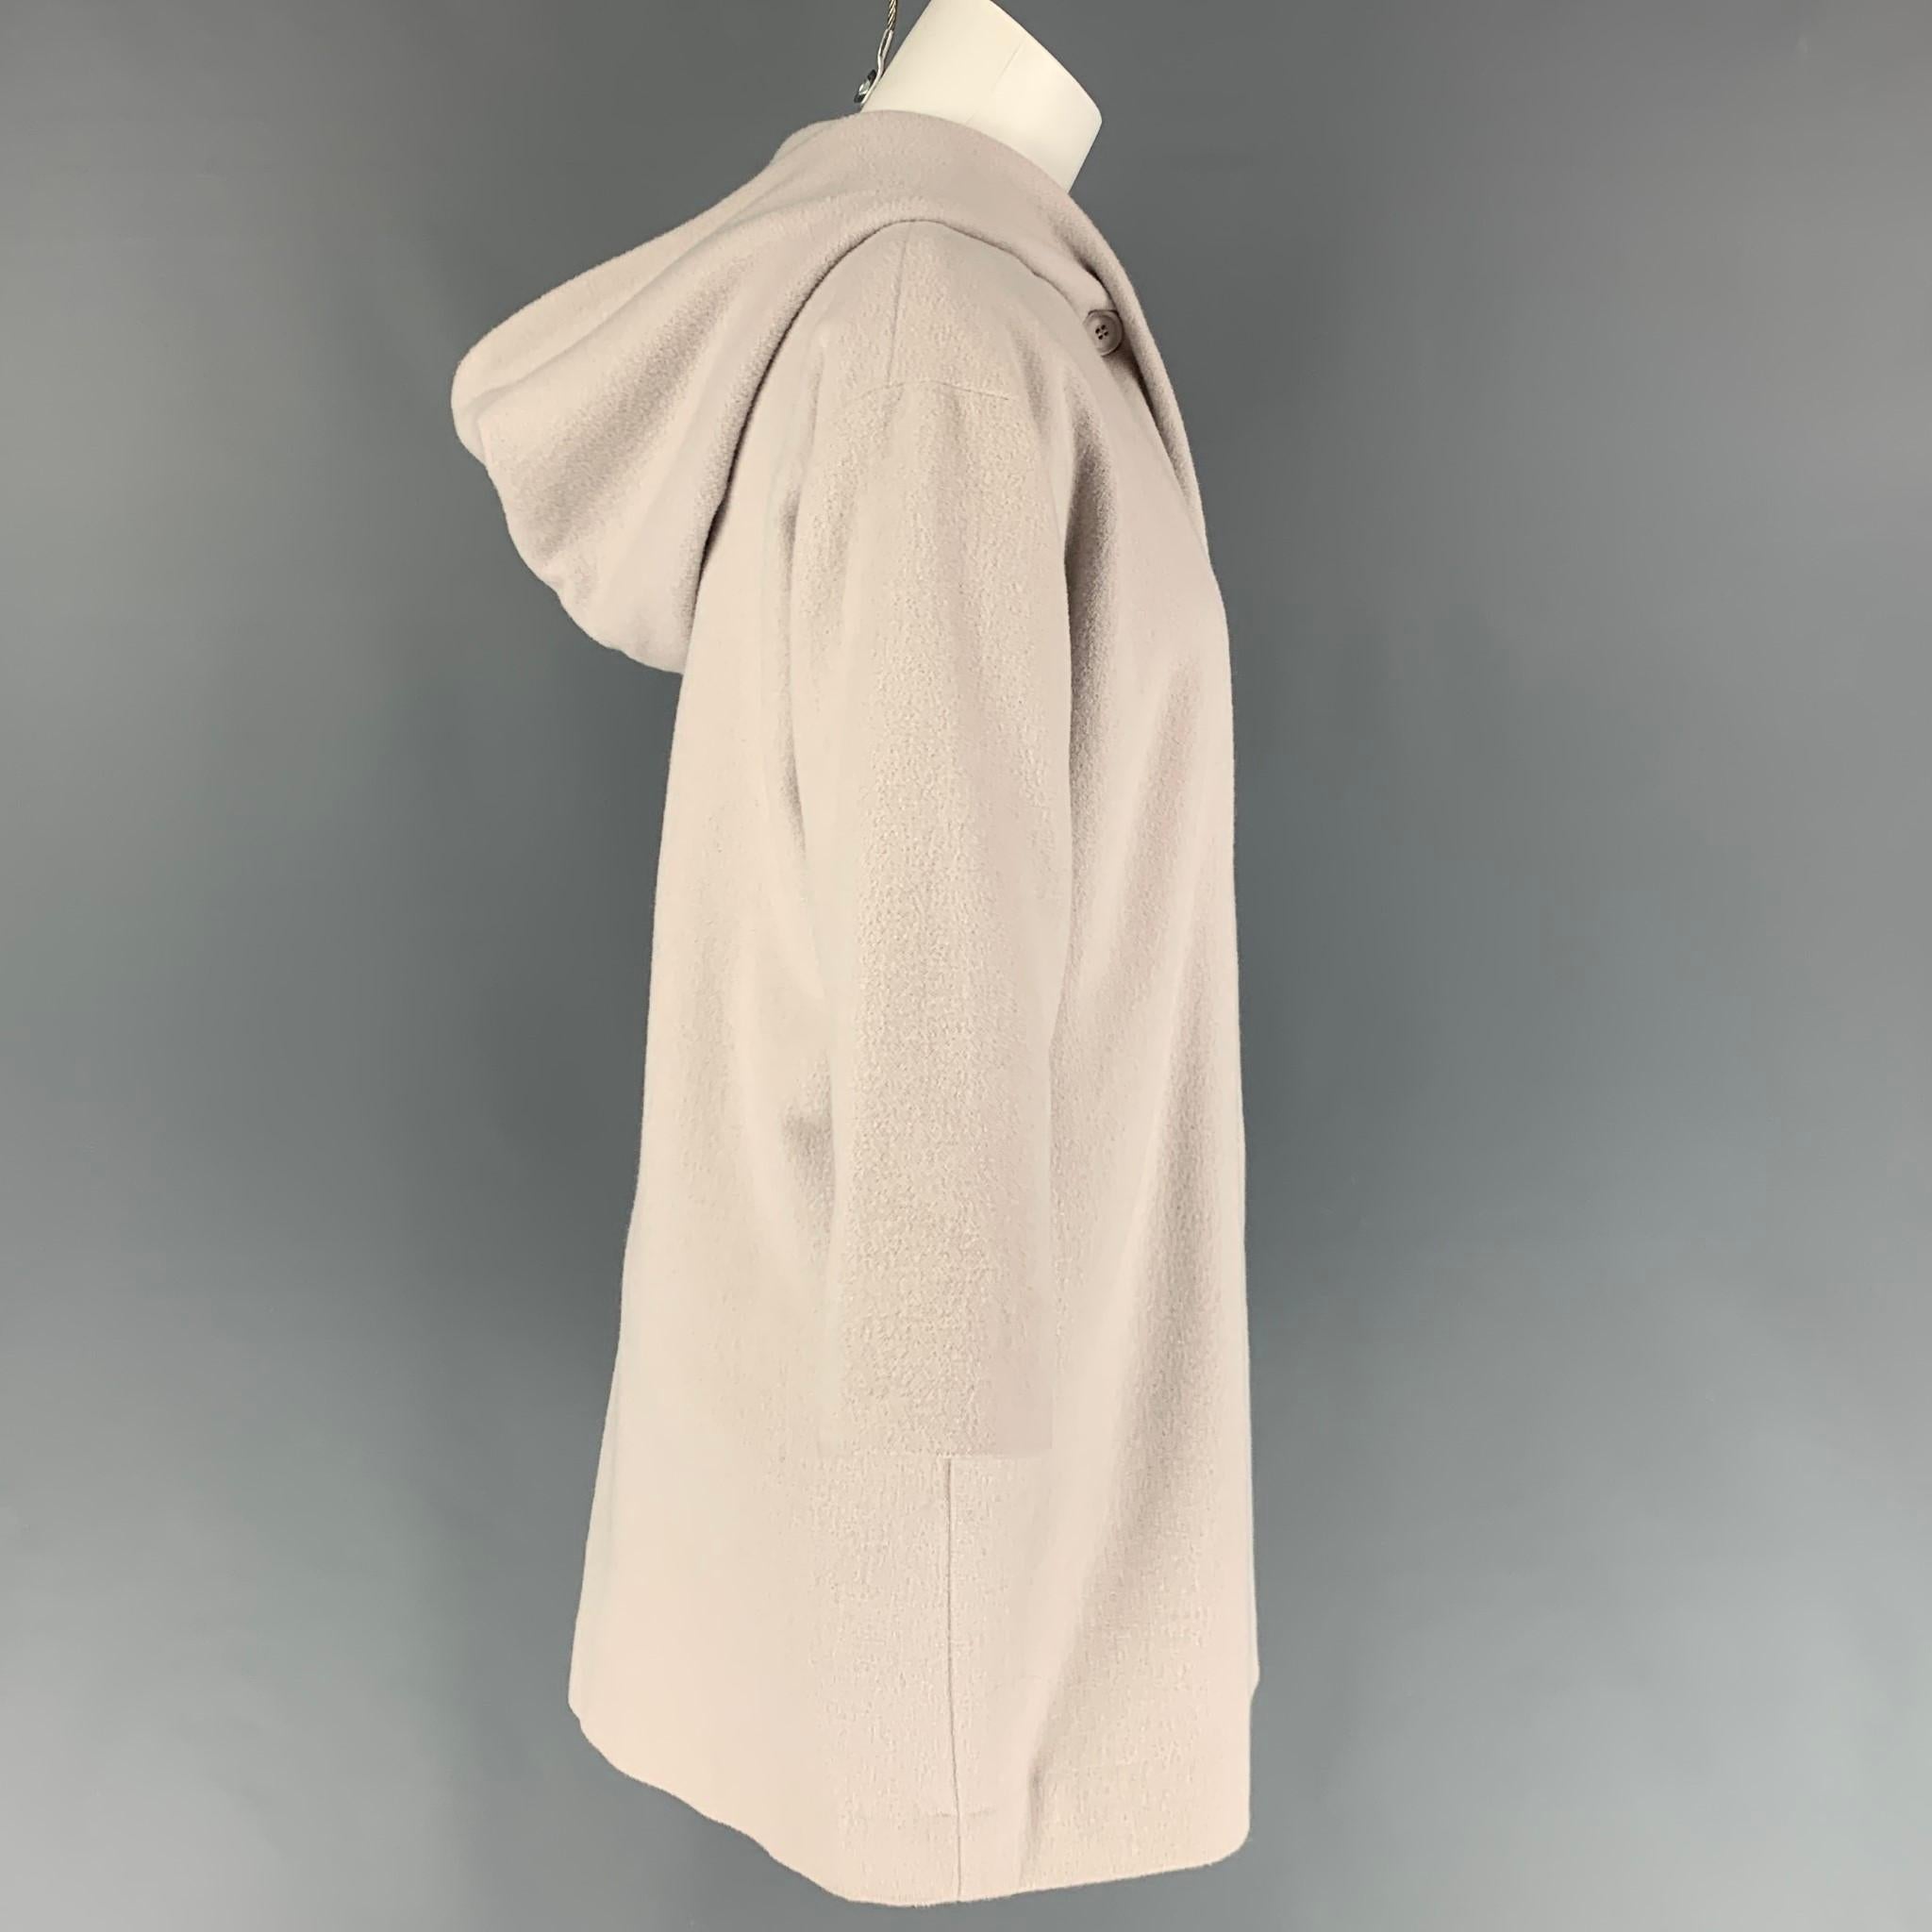 EVAM EVA coat comes in a dust pink wool / angora featuring a hooded detail, slit pockets, 3/4 sleeves, and a buttoned closure. Made in Japan. 

Very Good Pre-Owned Condition.
Marked: 1

Measurements:

Shoulder: 20 in.
Bust: 41 in.
Sleeve: 17